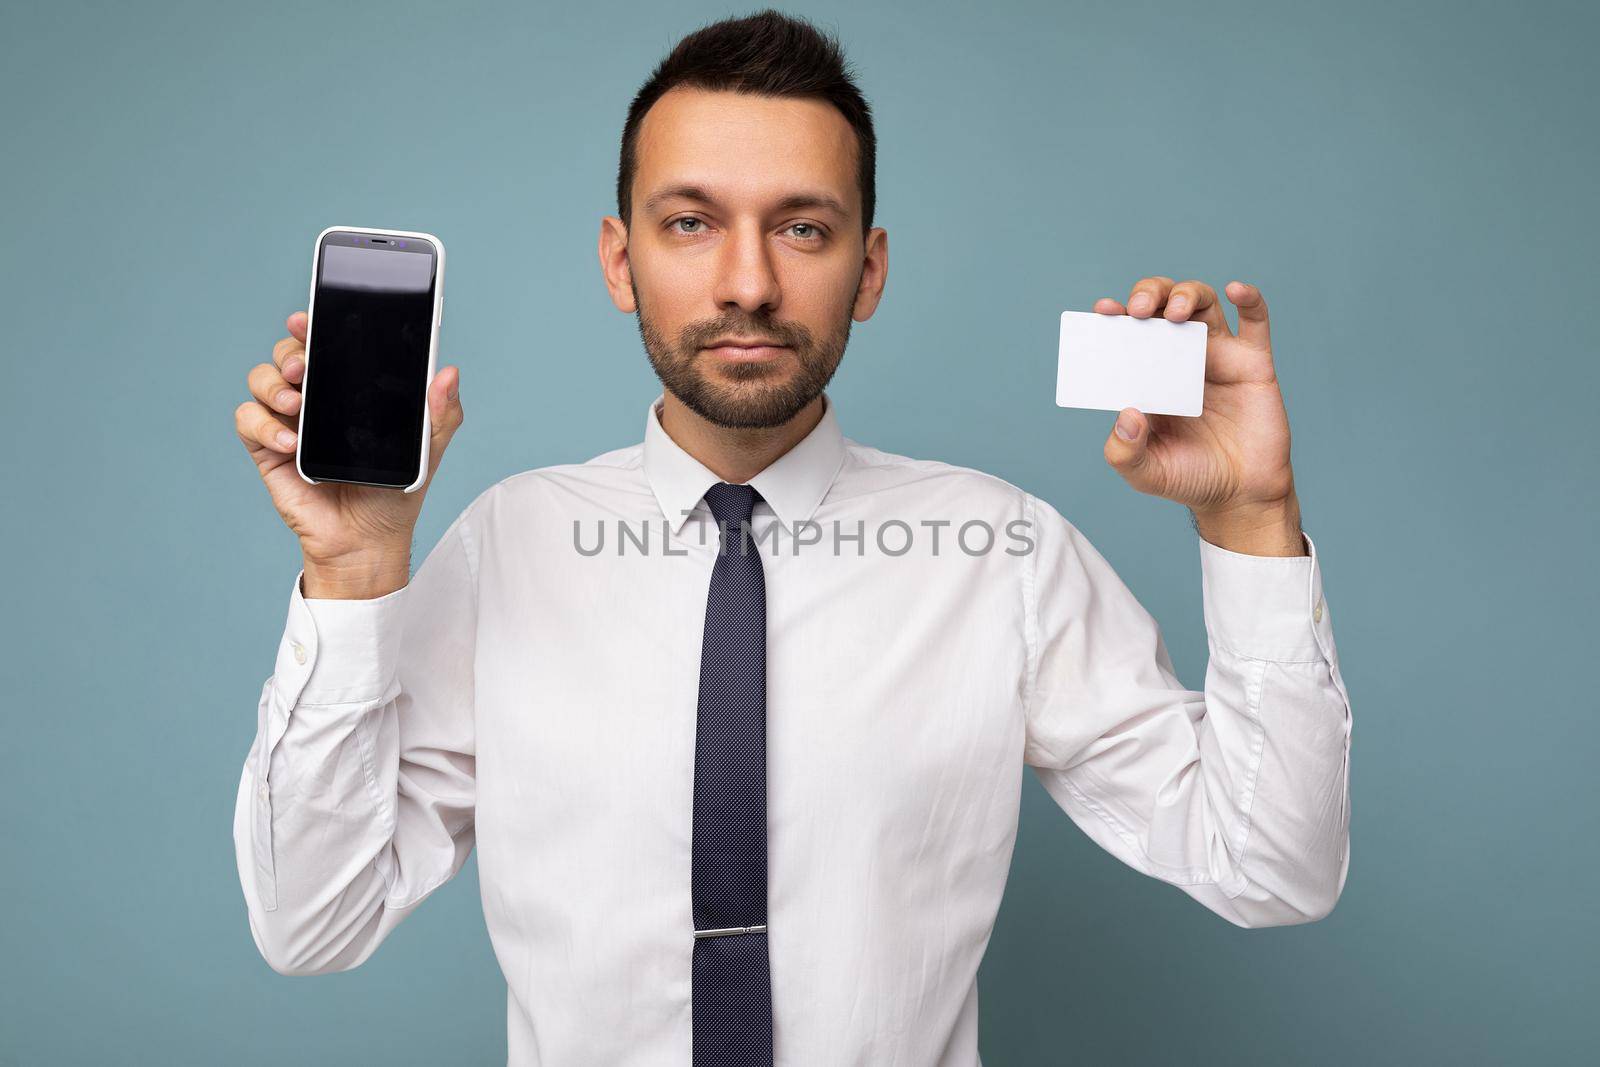 Photo of handsome good looking brunet man with beard wearing casual white shirt and tie isolated on blue background with empty space holding in hand and showing mobile phone with empty screen for mockup and credit card looking at camera.